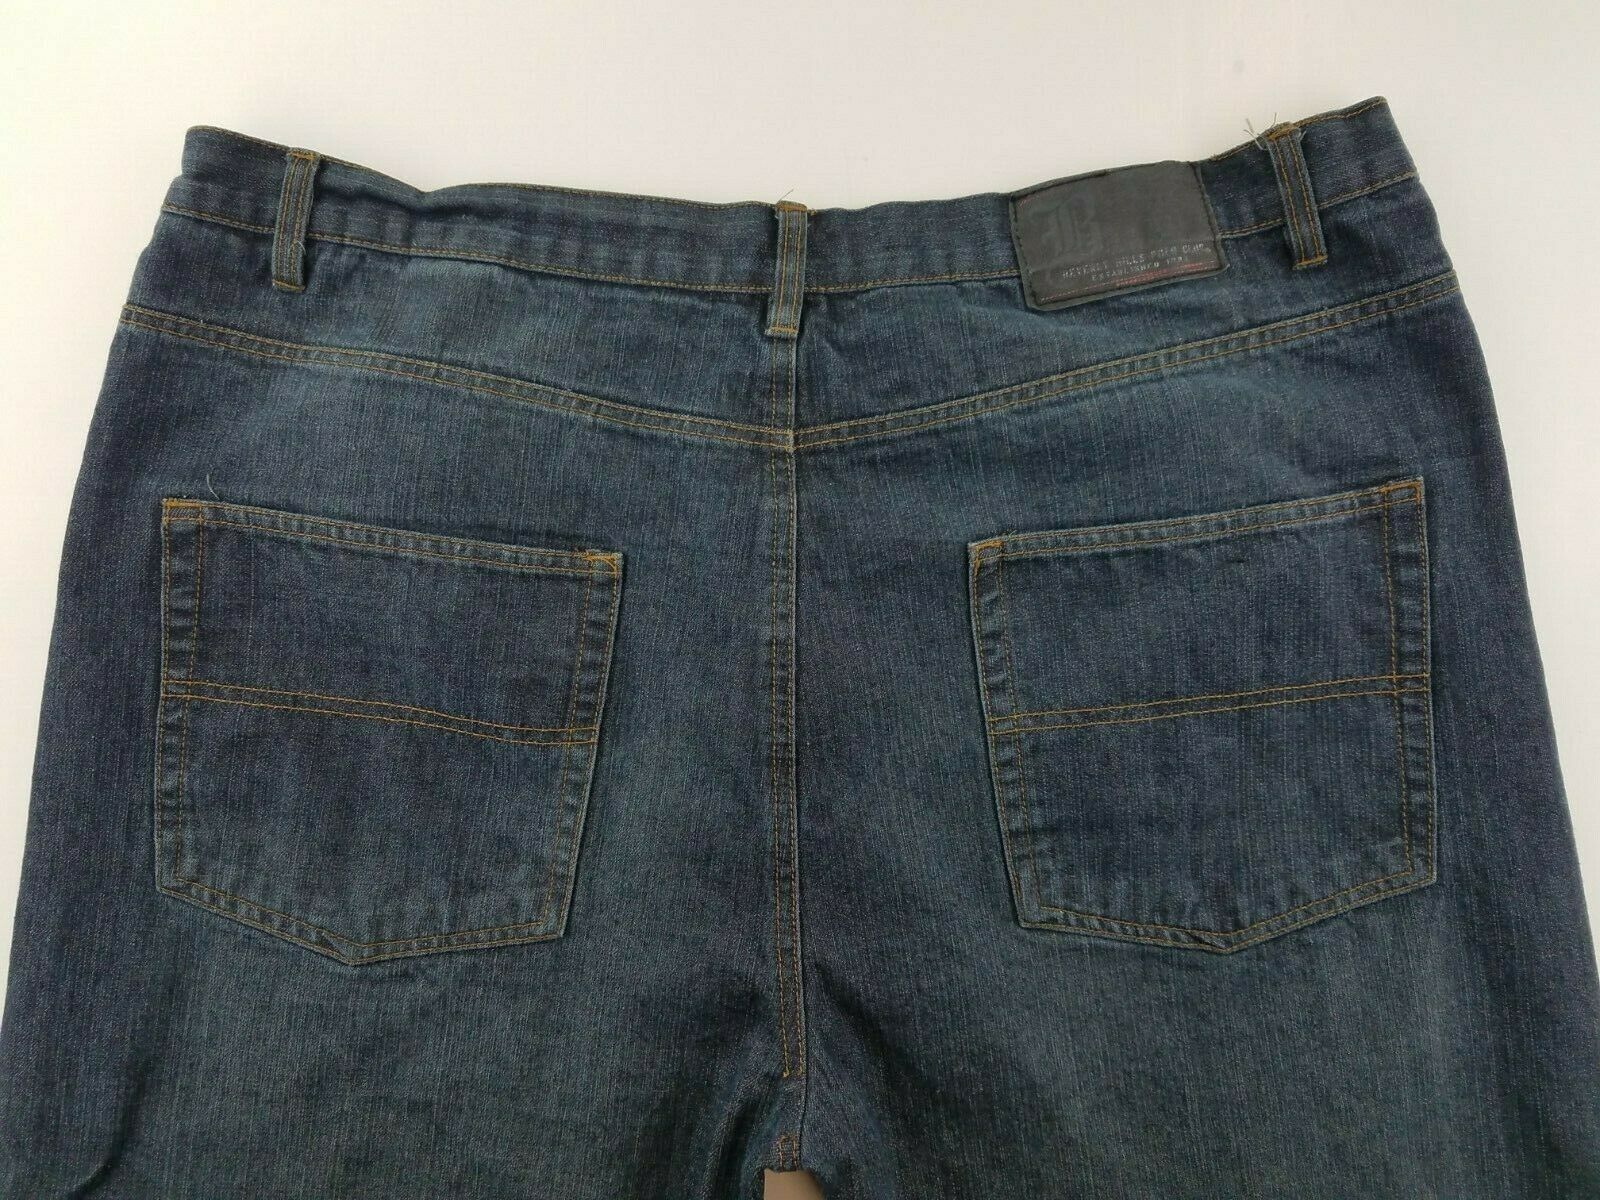 Beverly Hills Polo Club Jeans Mens 44x30 Dark Wash Loose Fit A12-04 - Jeans